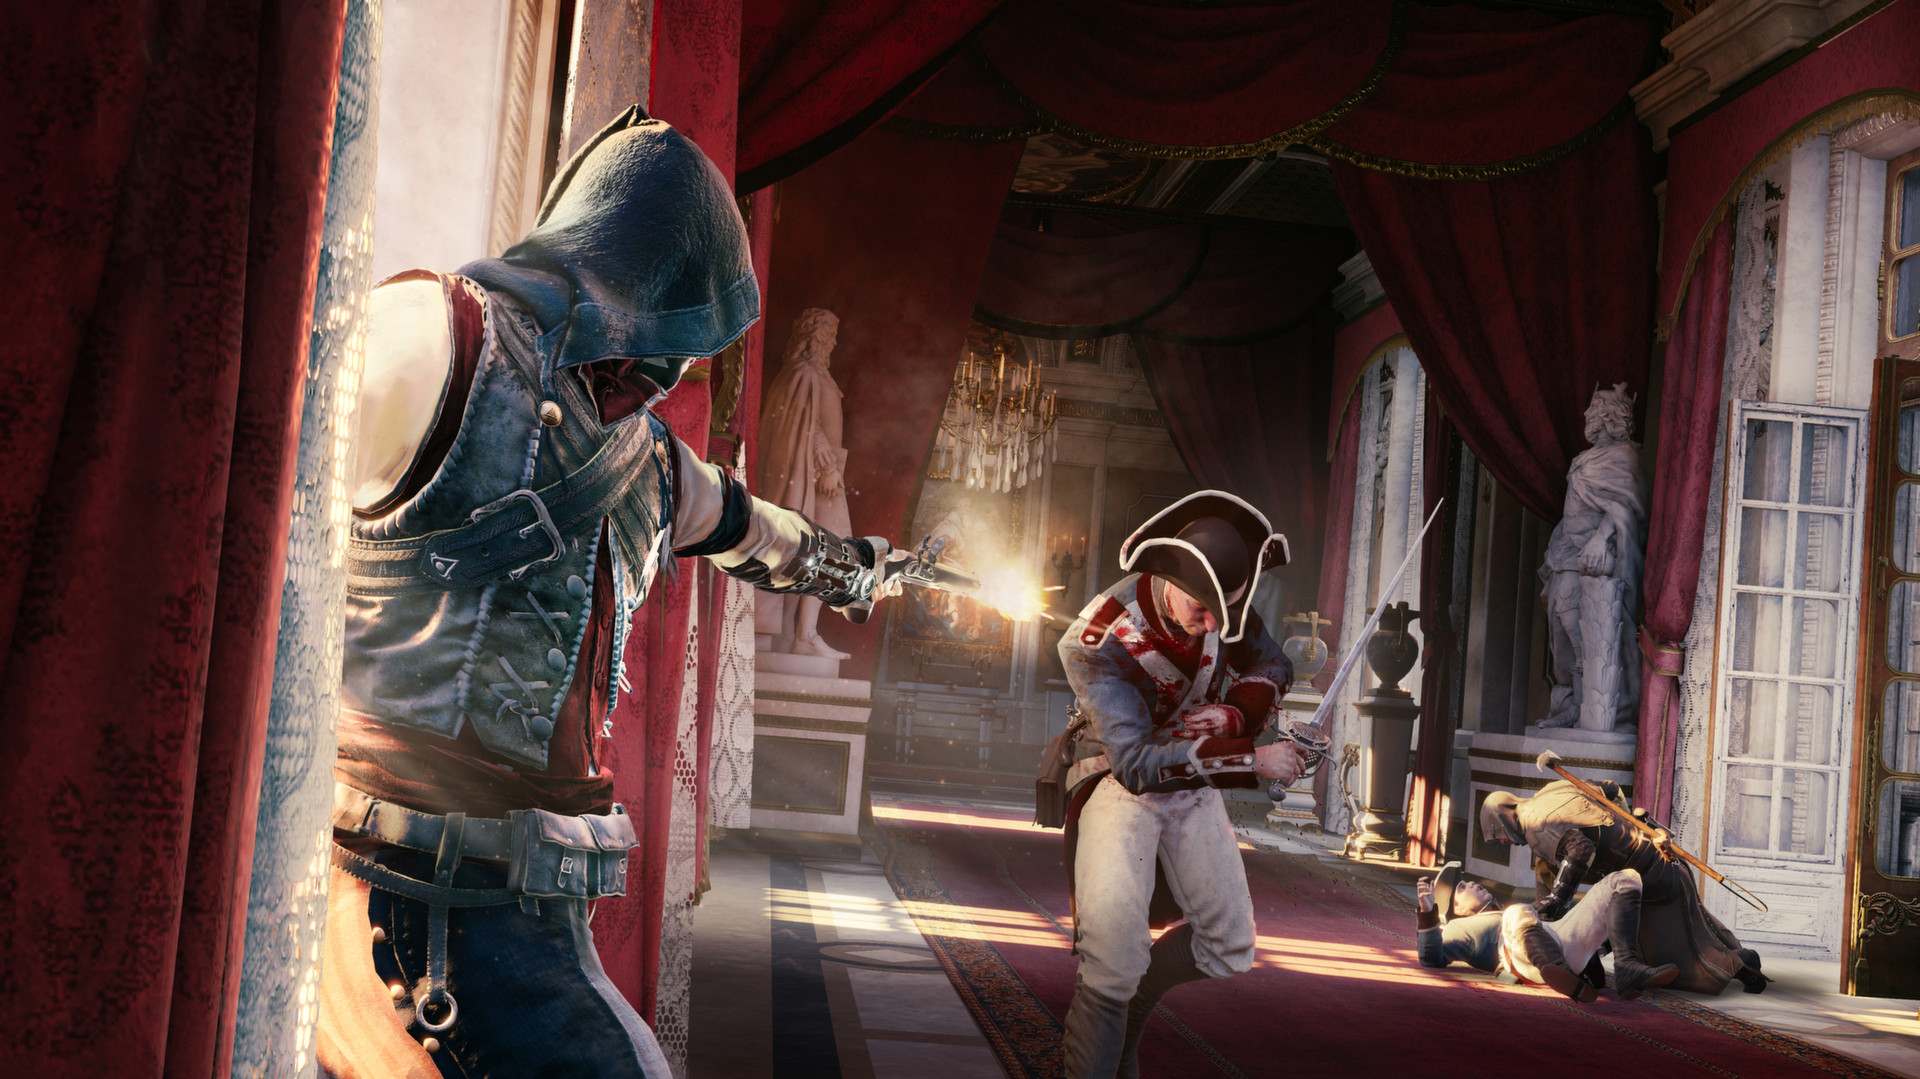 Save 75% on Assassin's Creed® III Remastered on Steam